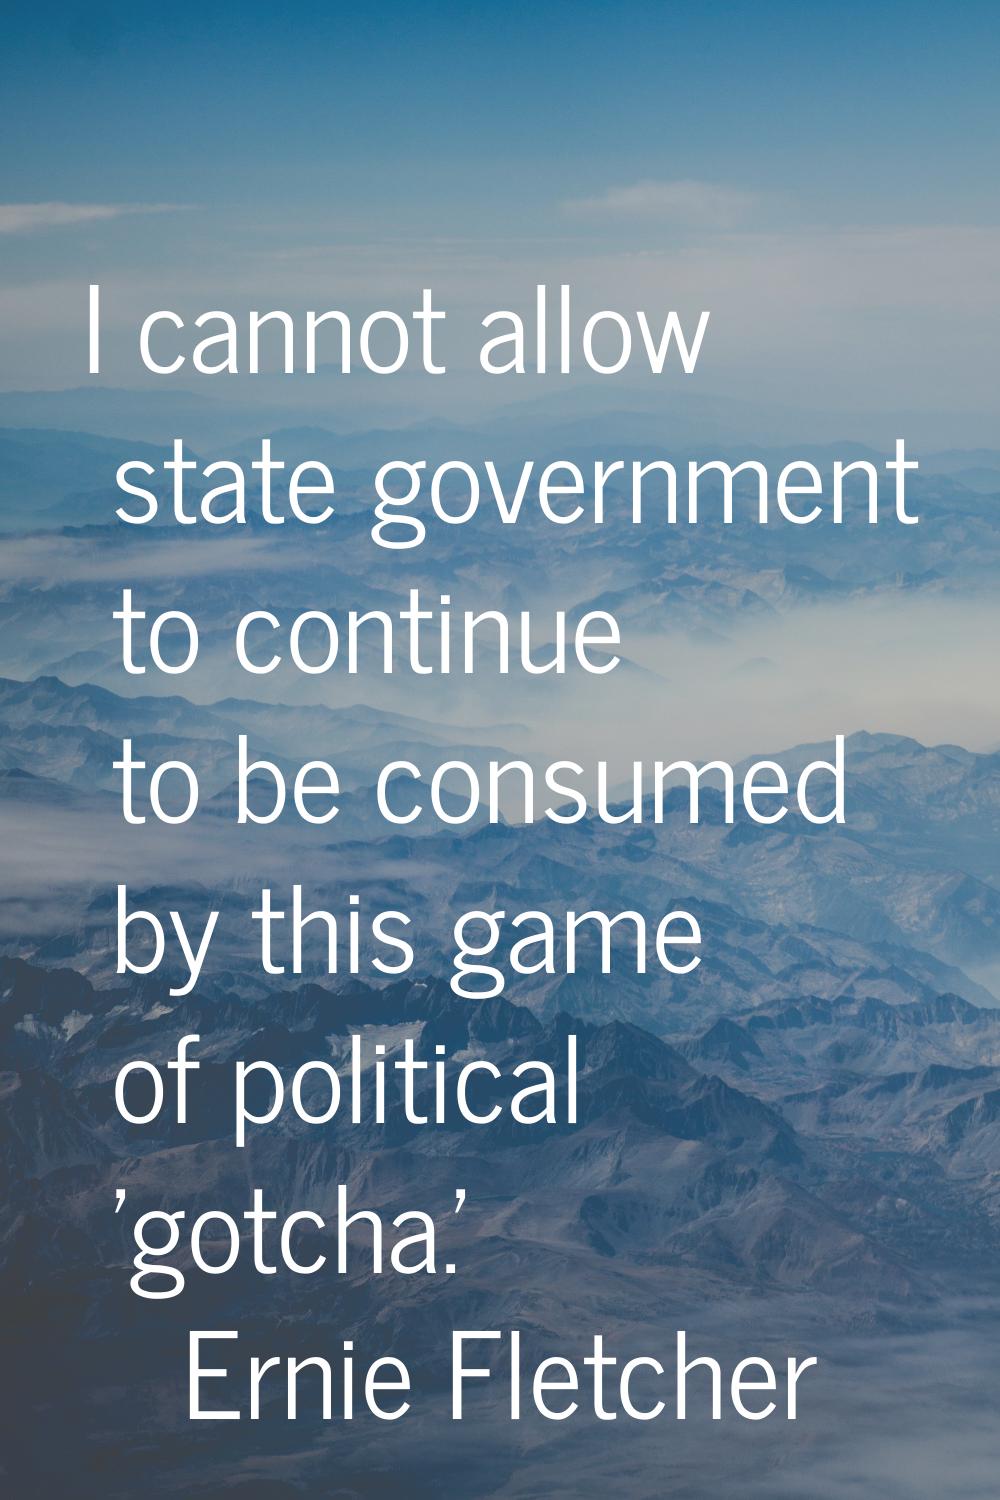 I cannot allow state government to continue to be consumed by this game of political 'gotcha.'